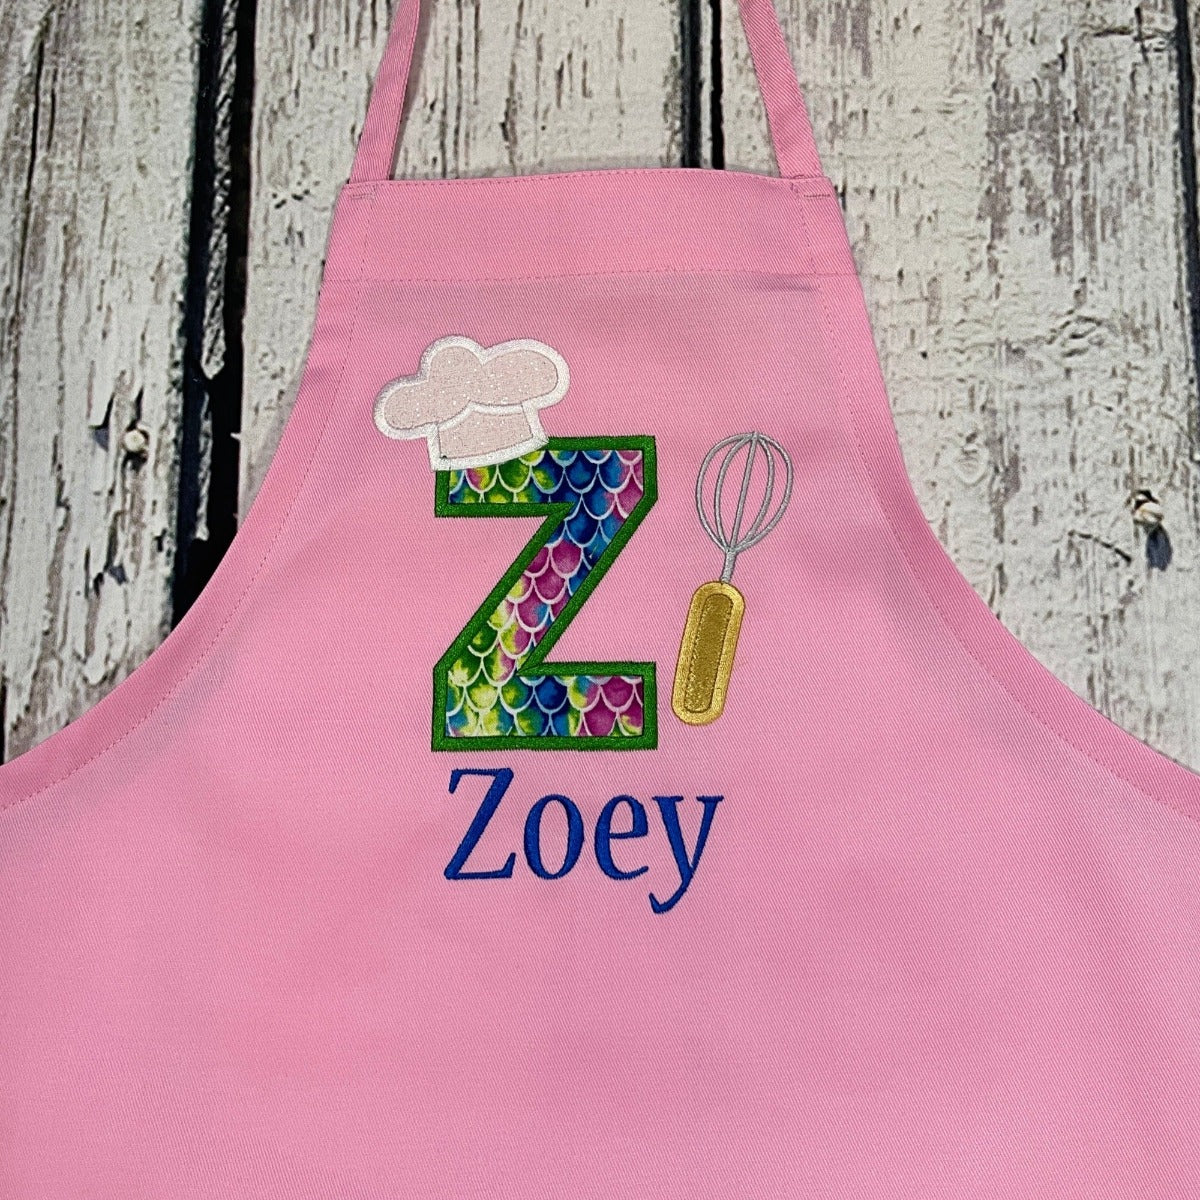 Girls personalized pink apron with mermaid theme large initial